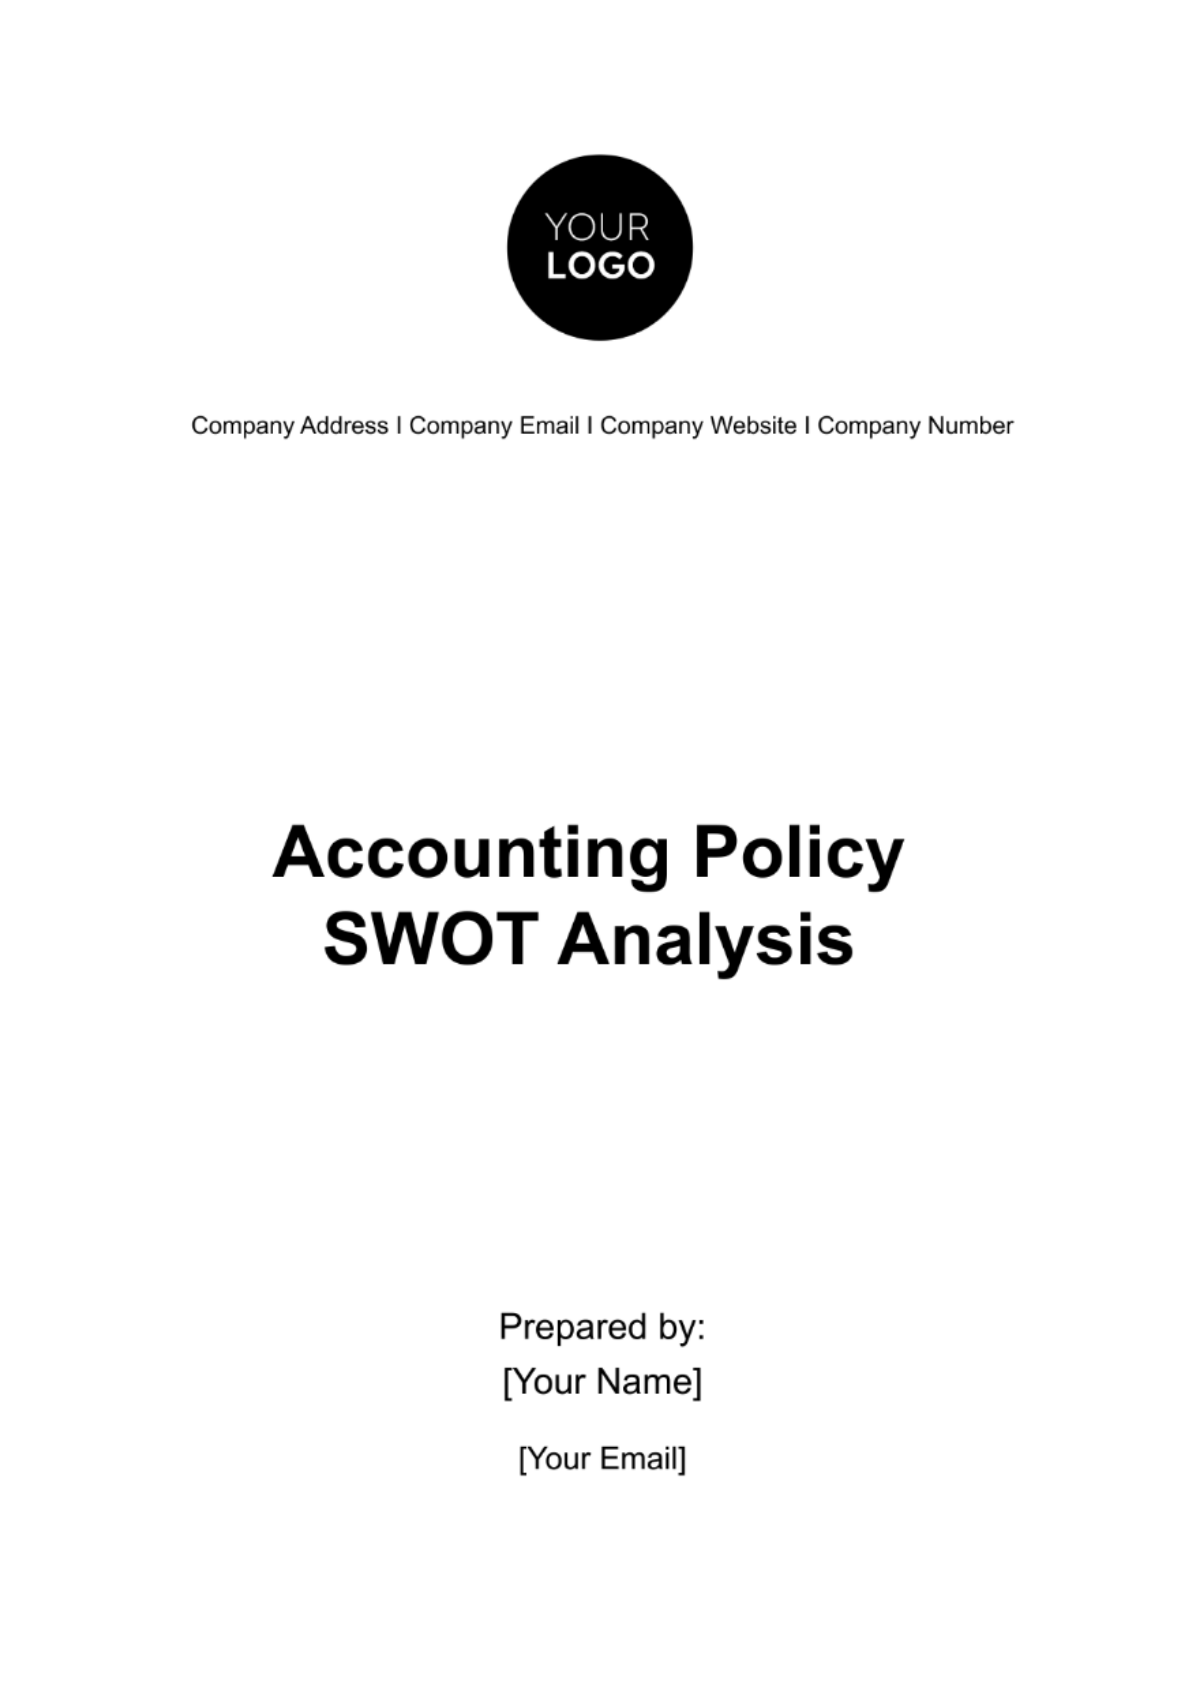 Free Accounting Policy SWOT Analysis Template